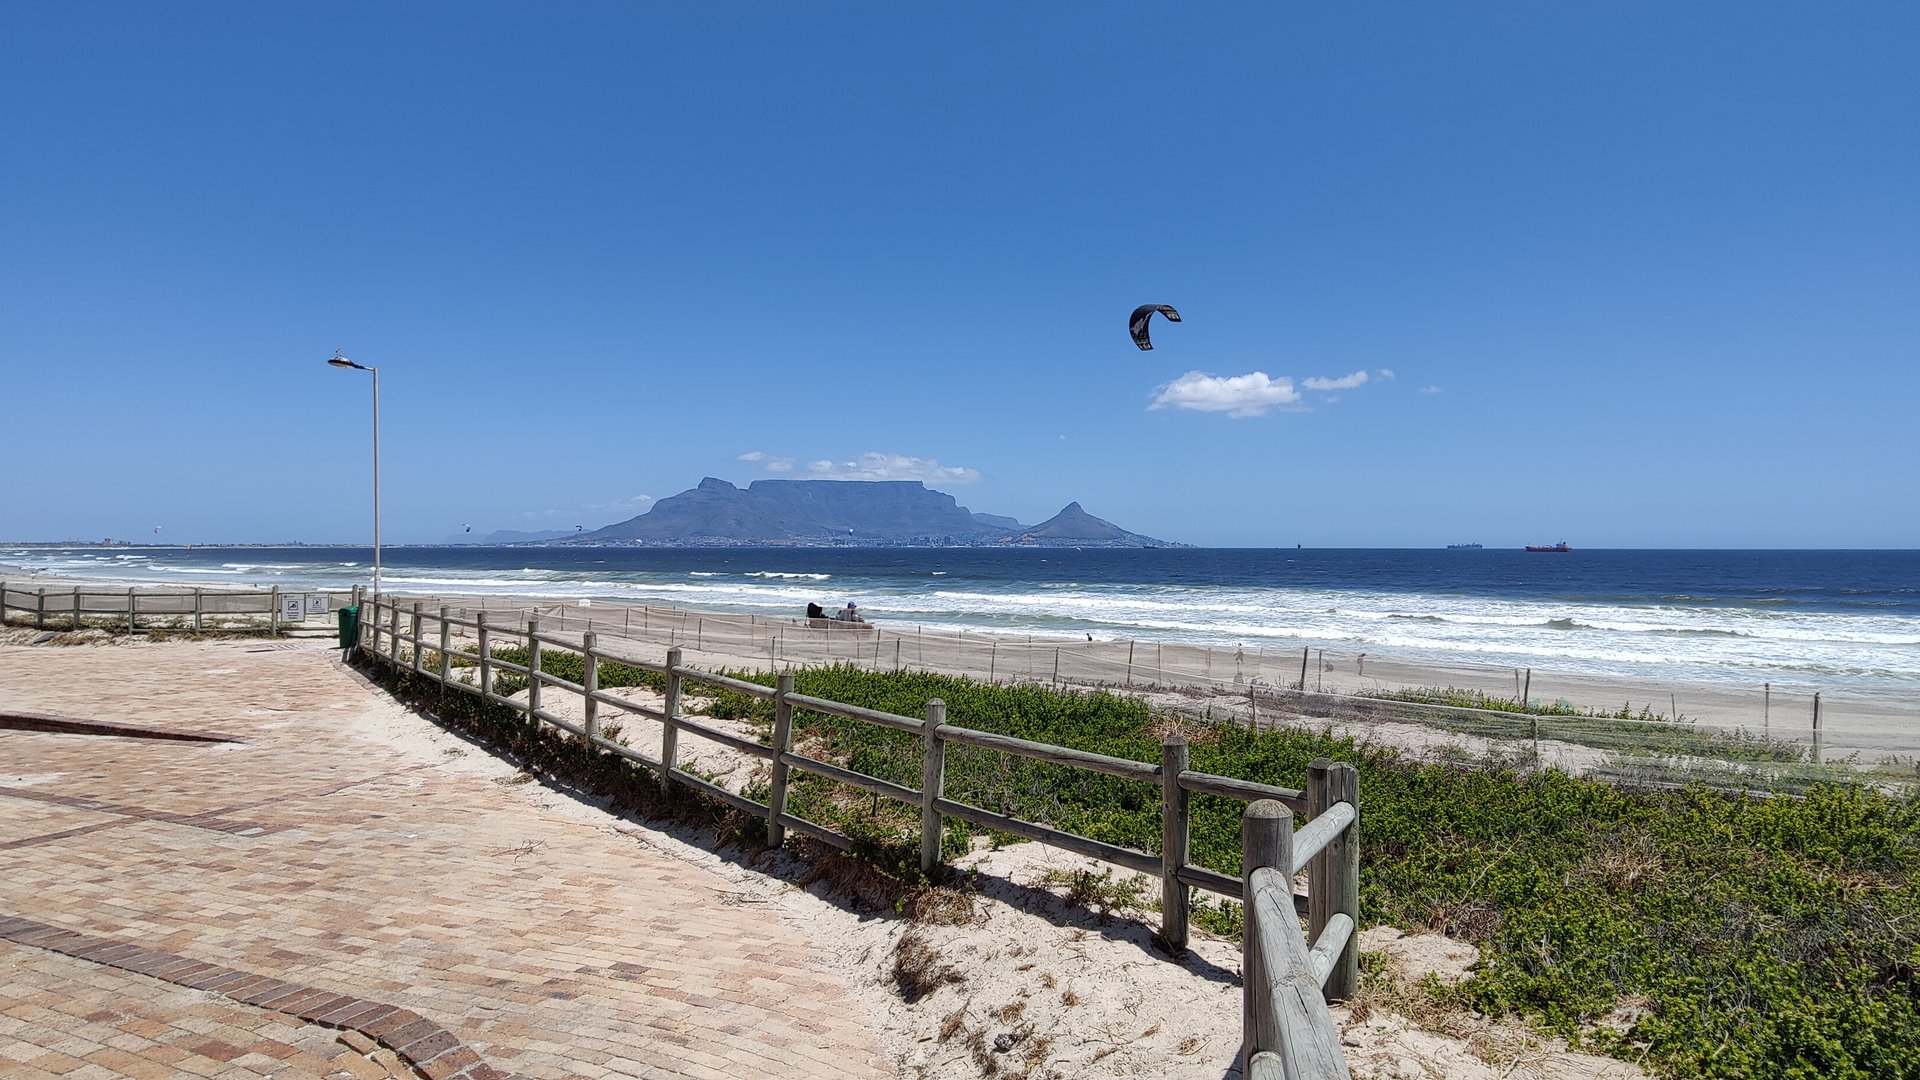 View from parking in Blouberg strand to table top mountain with 1 single kiter riding. Nice sunny weather with no Clouds.